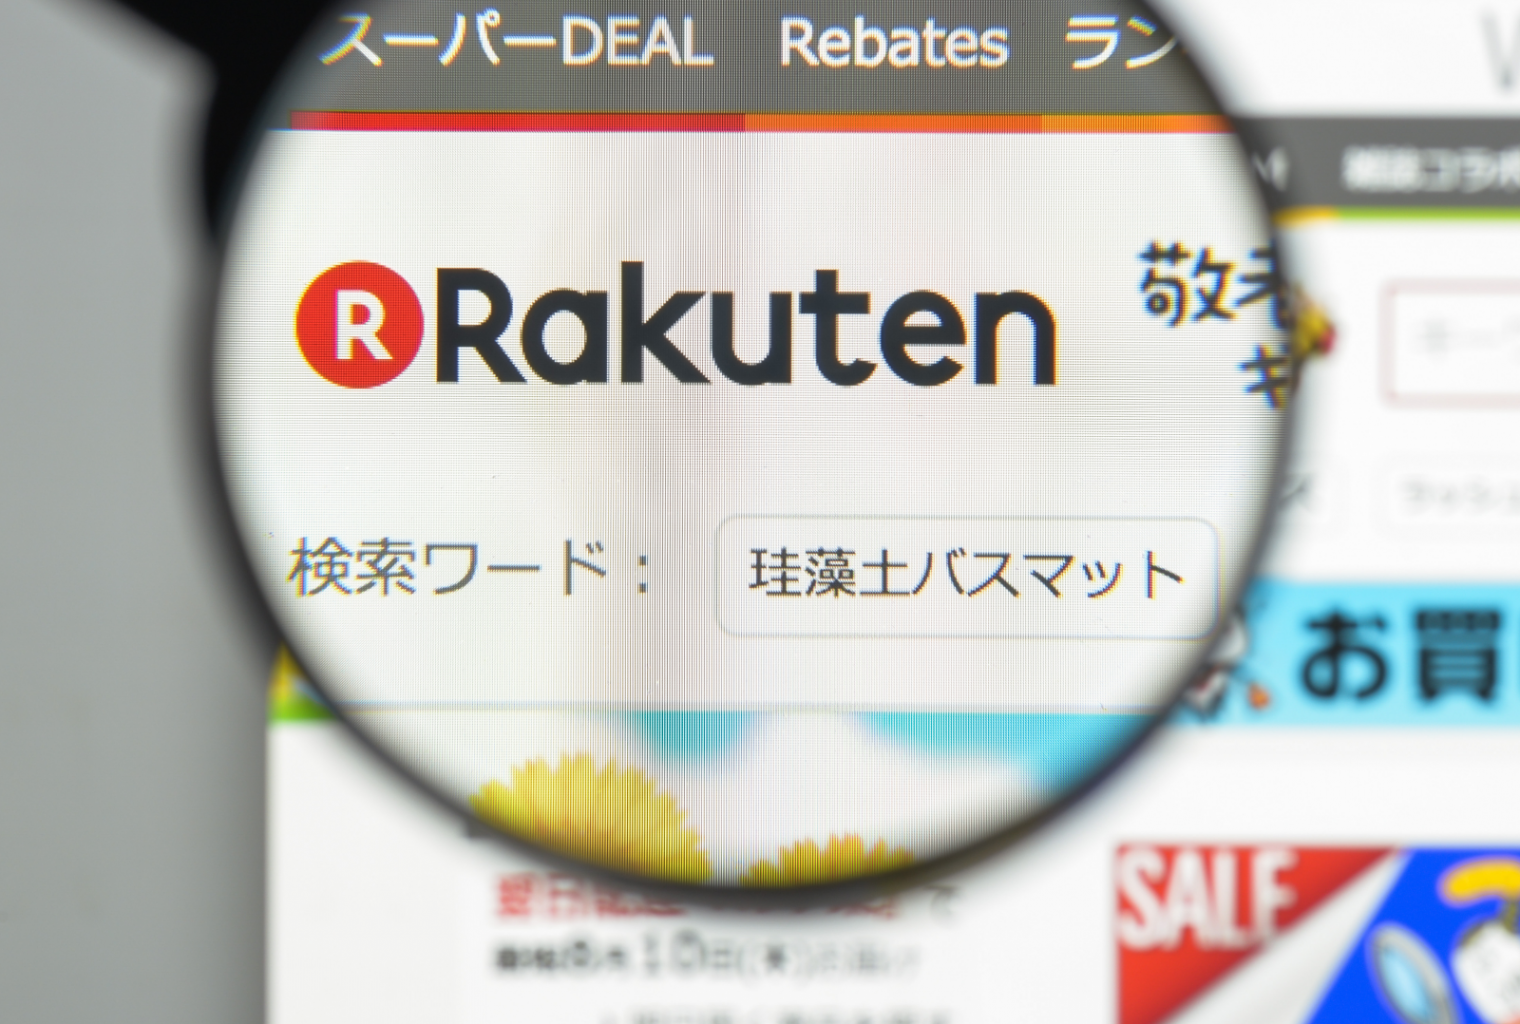 RAKUTEN ADDS CRYPTOCURRENCY IN ITS APPLICATION